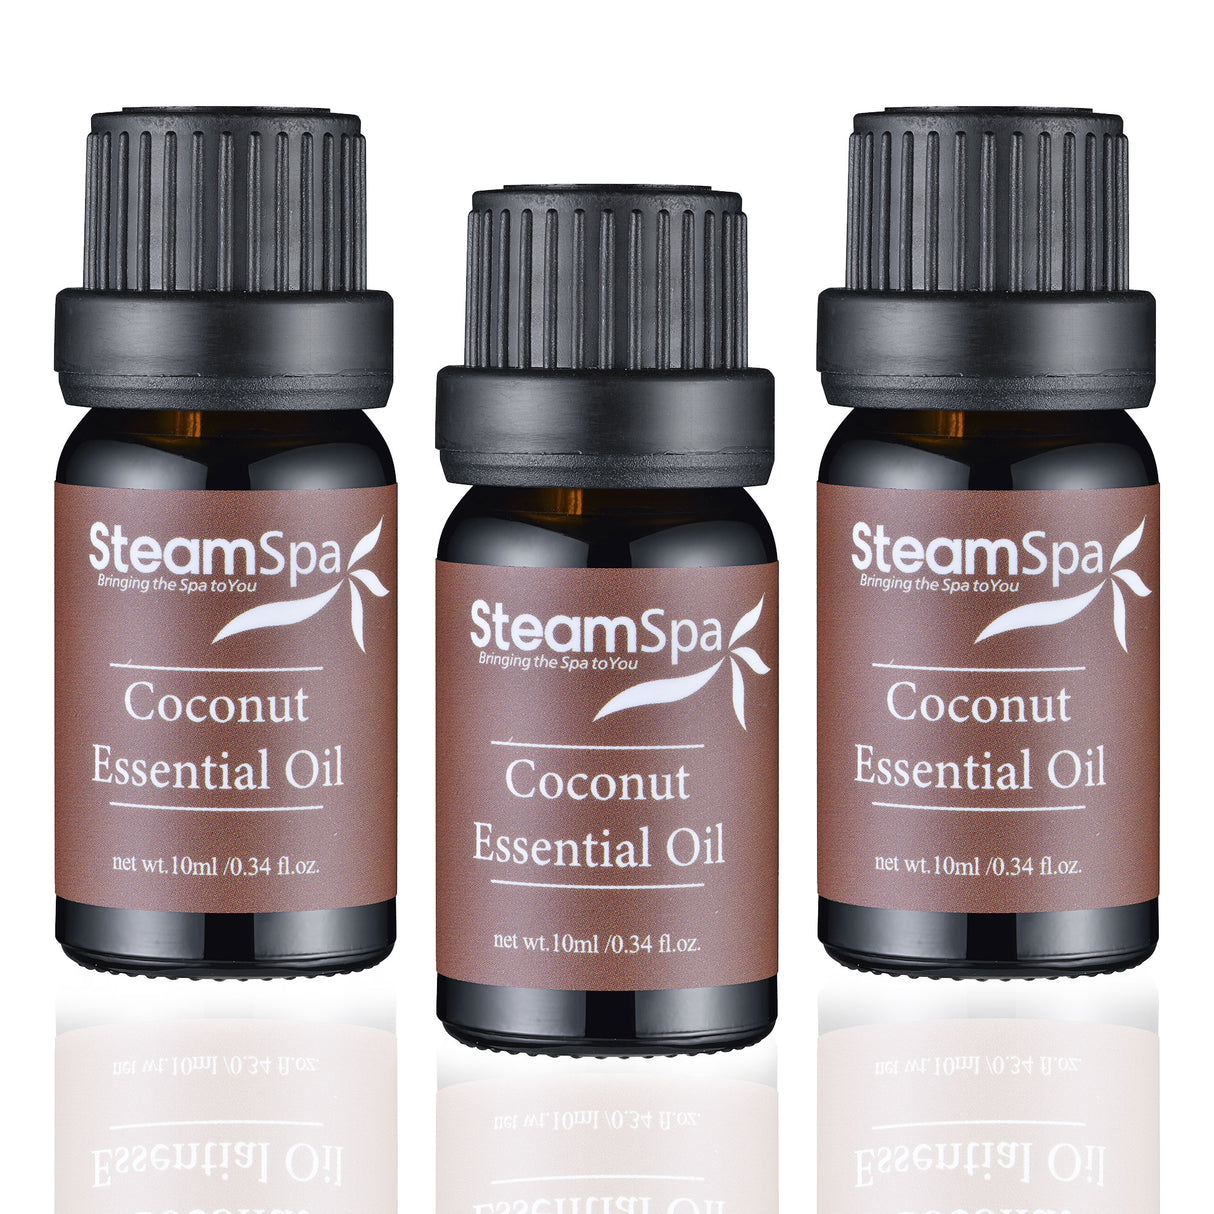 SteamSpa Essence of Coconut Aromatherapy Oil Extract Value Pack G-OILCN3